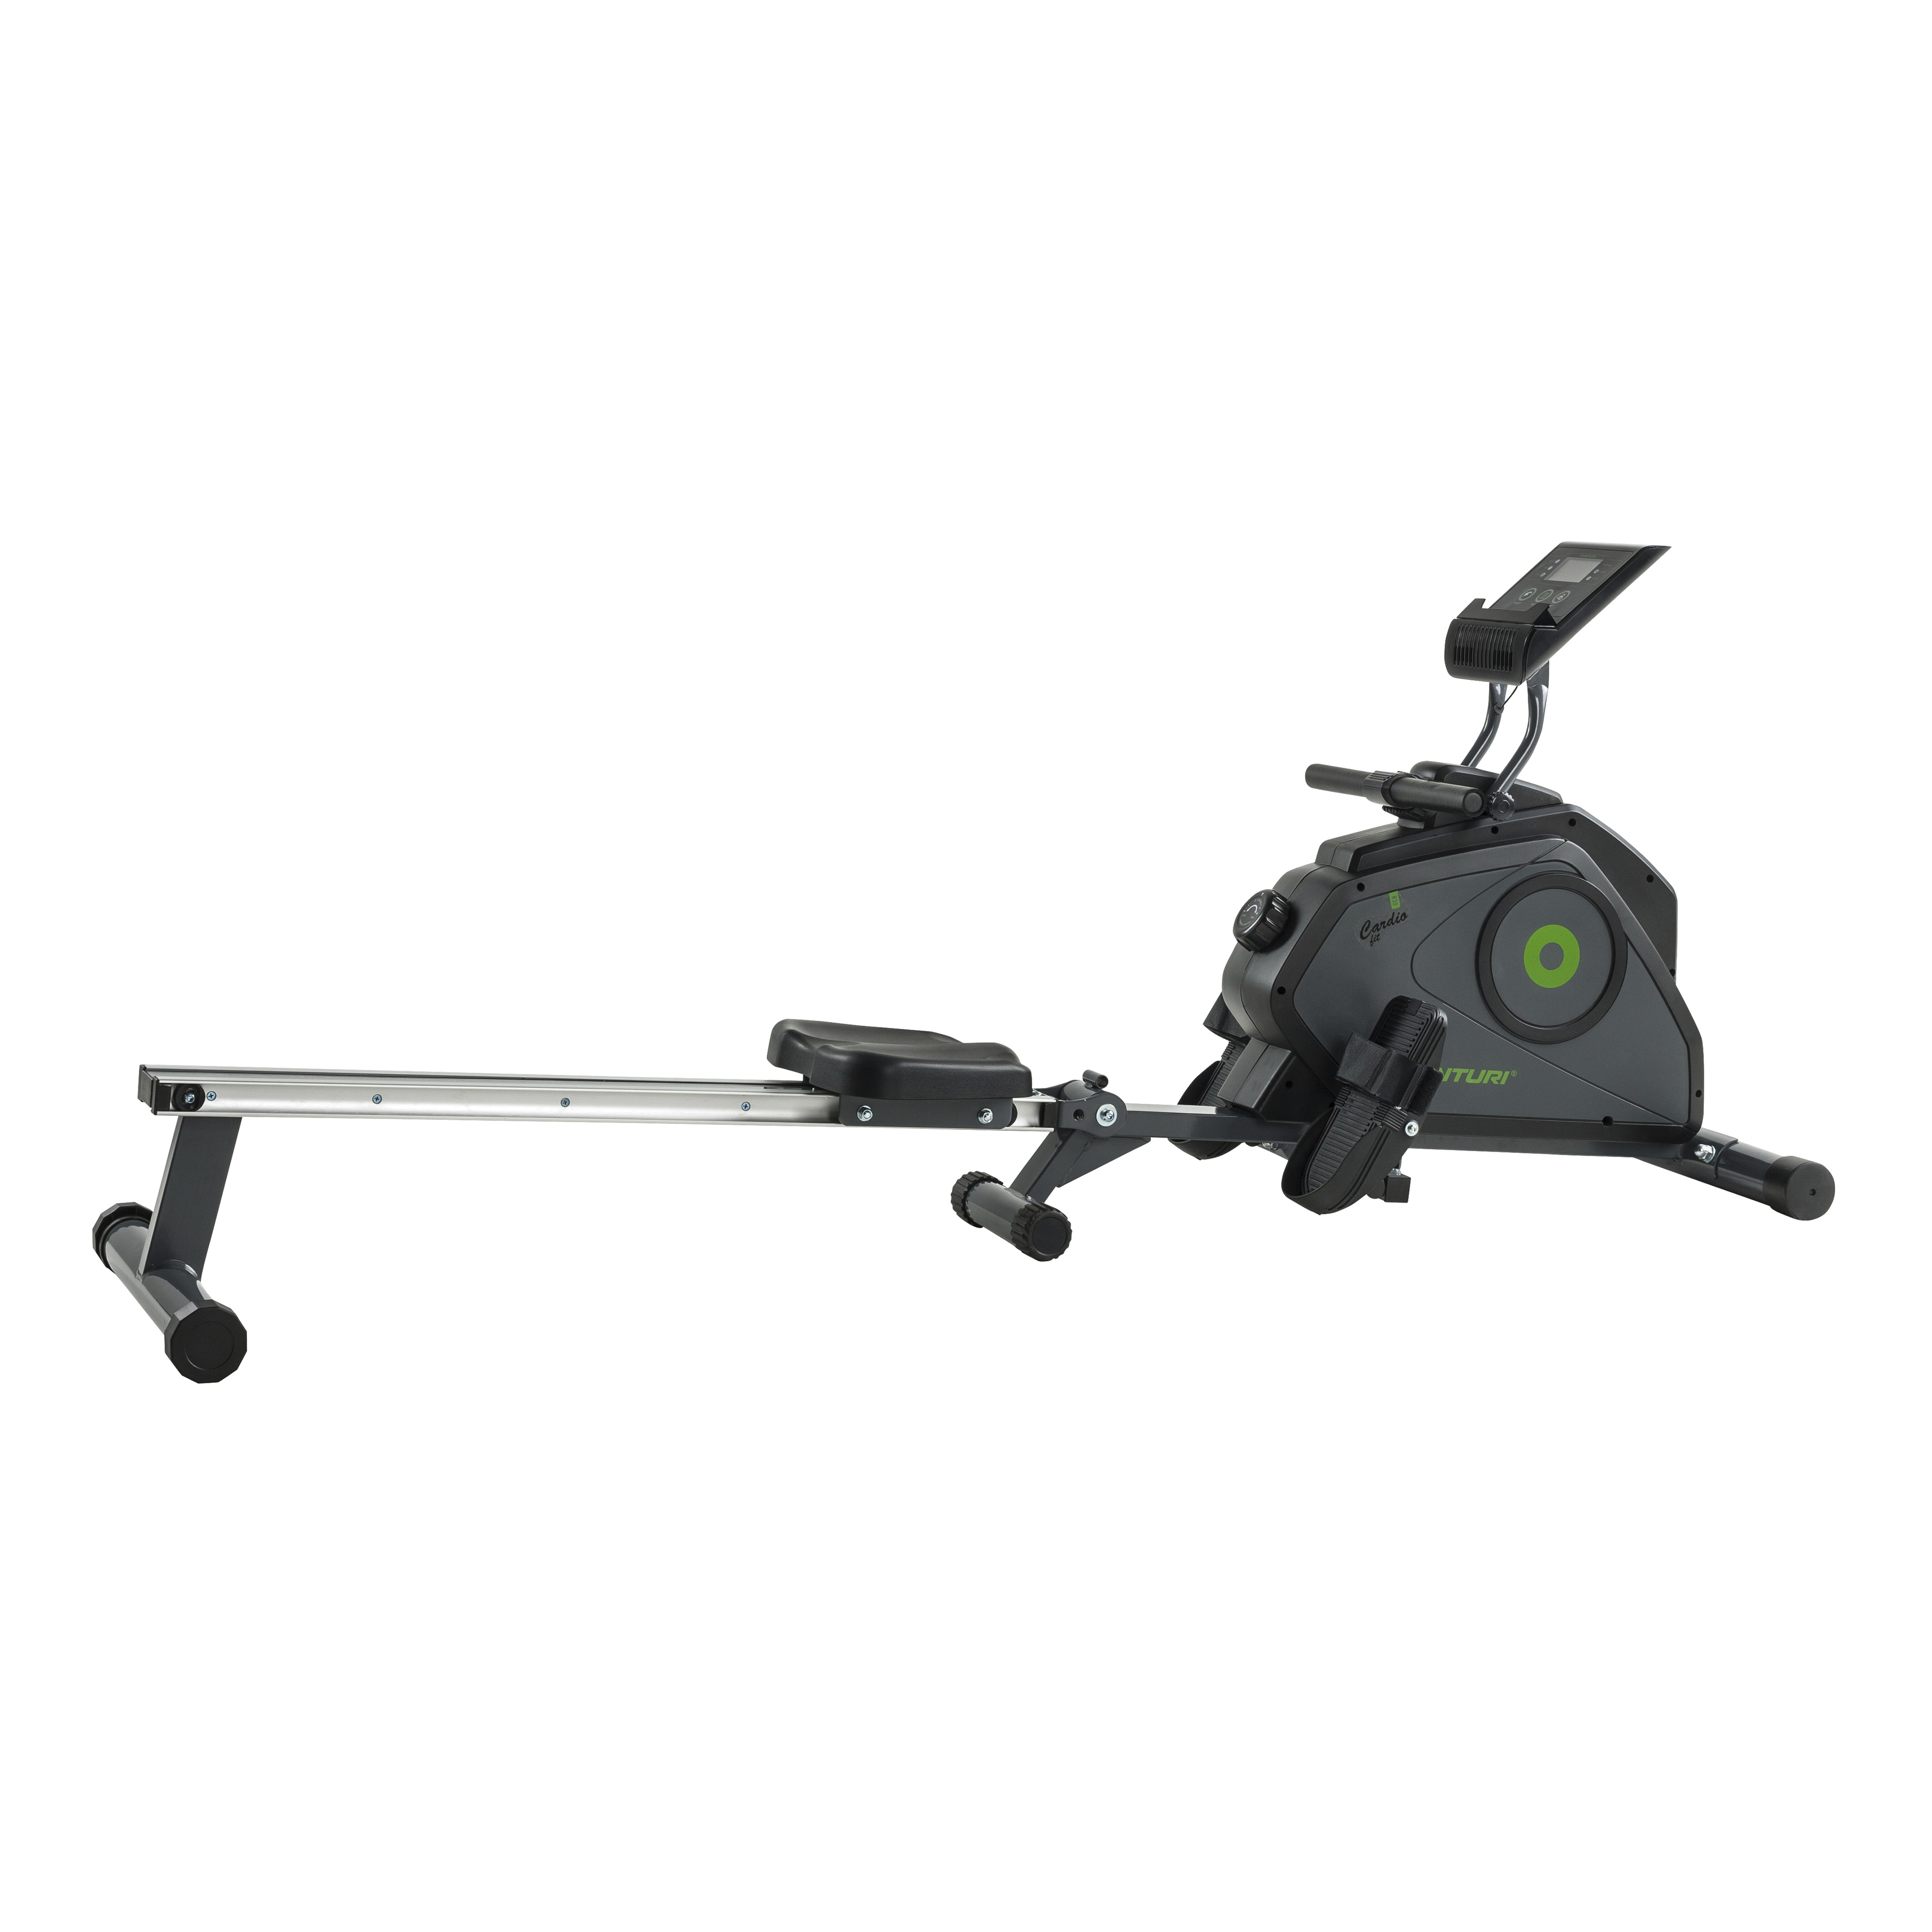 770260 FITNESS ROWING EXERCISER